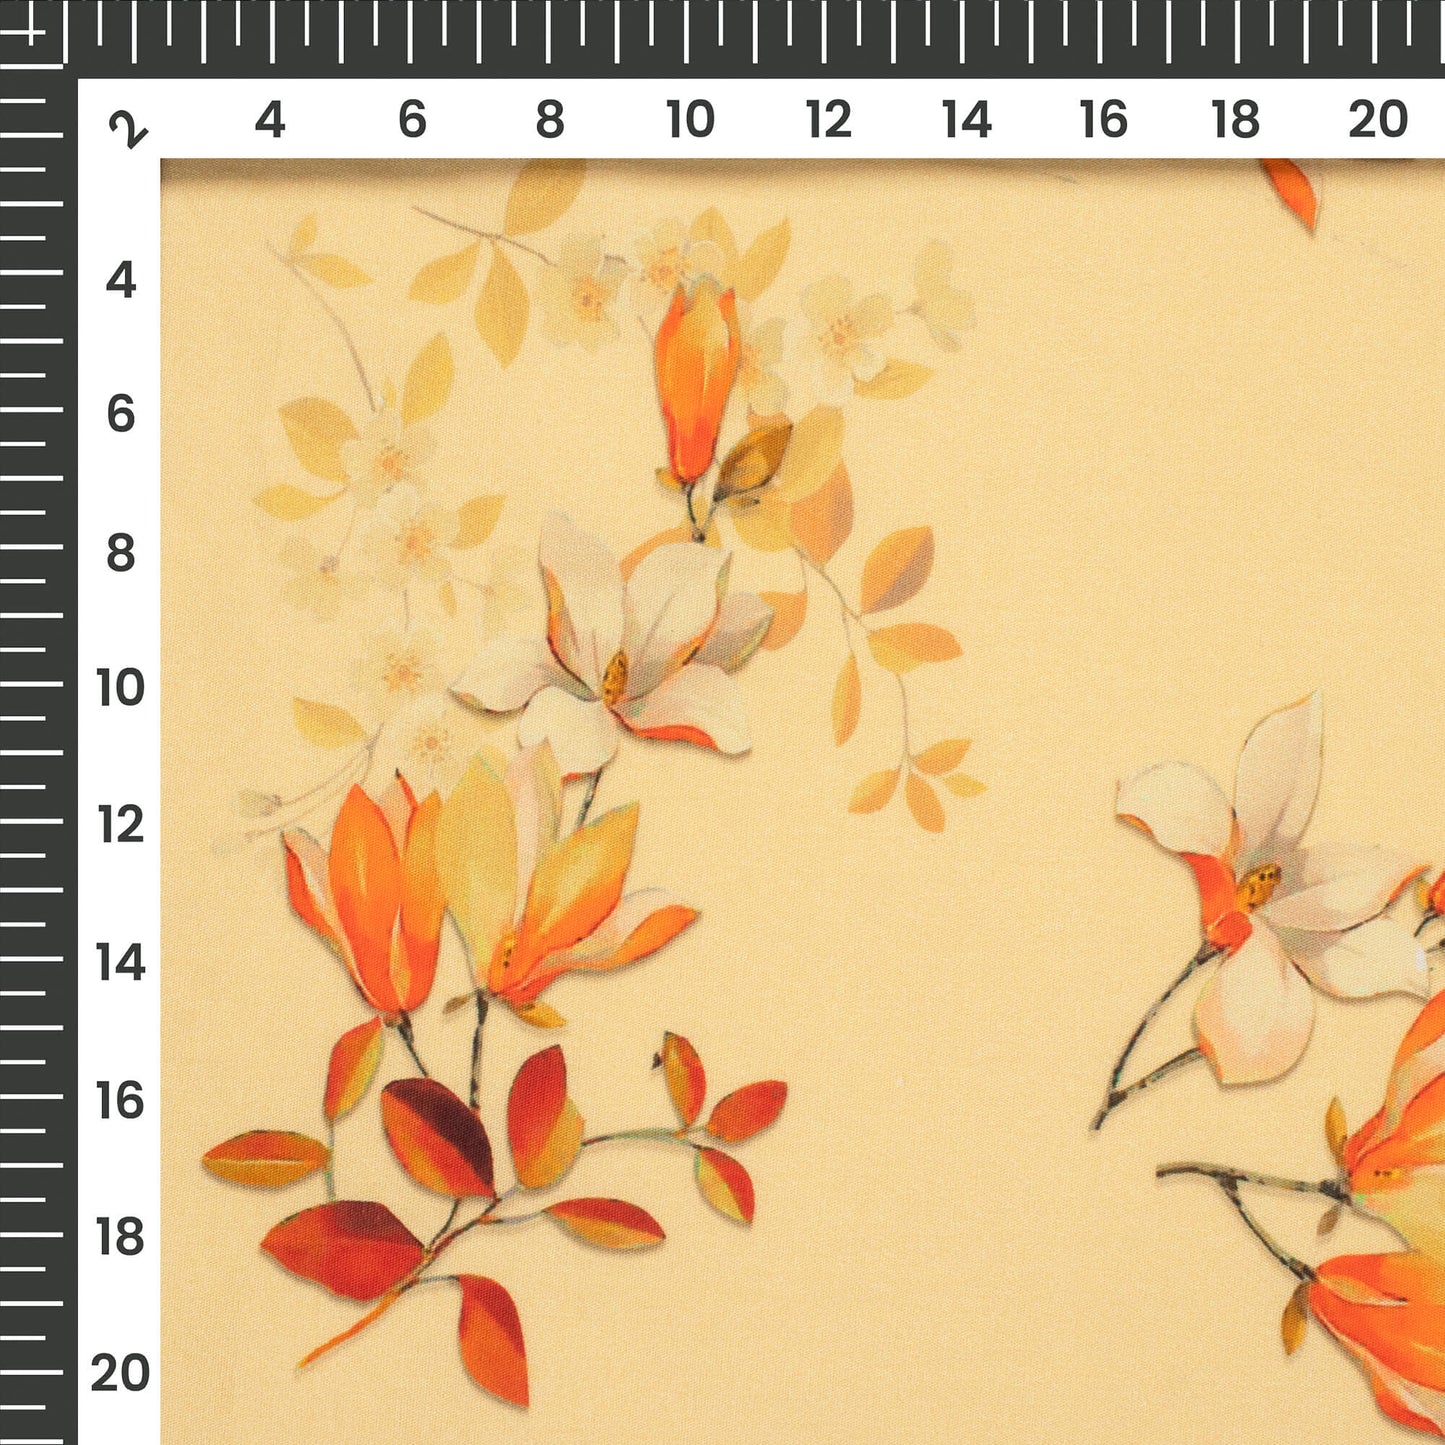 Red Brown Floral Digital Print Poplin Fabric (Width 58 Inches)